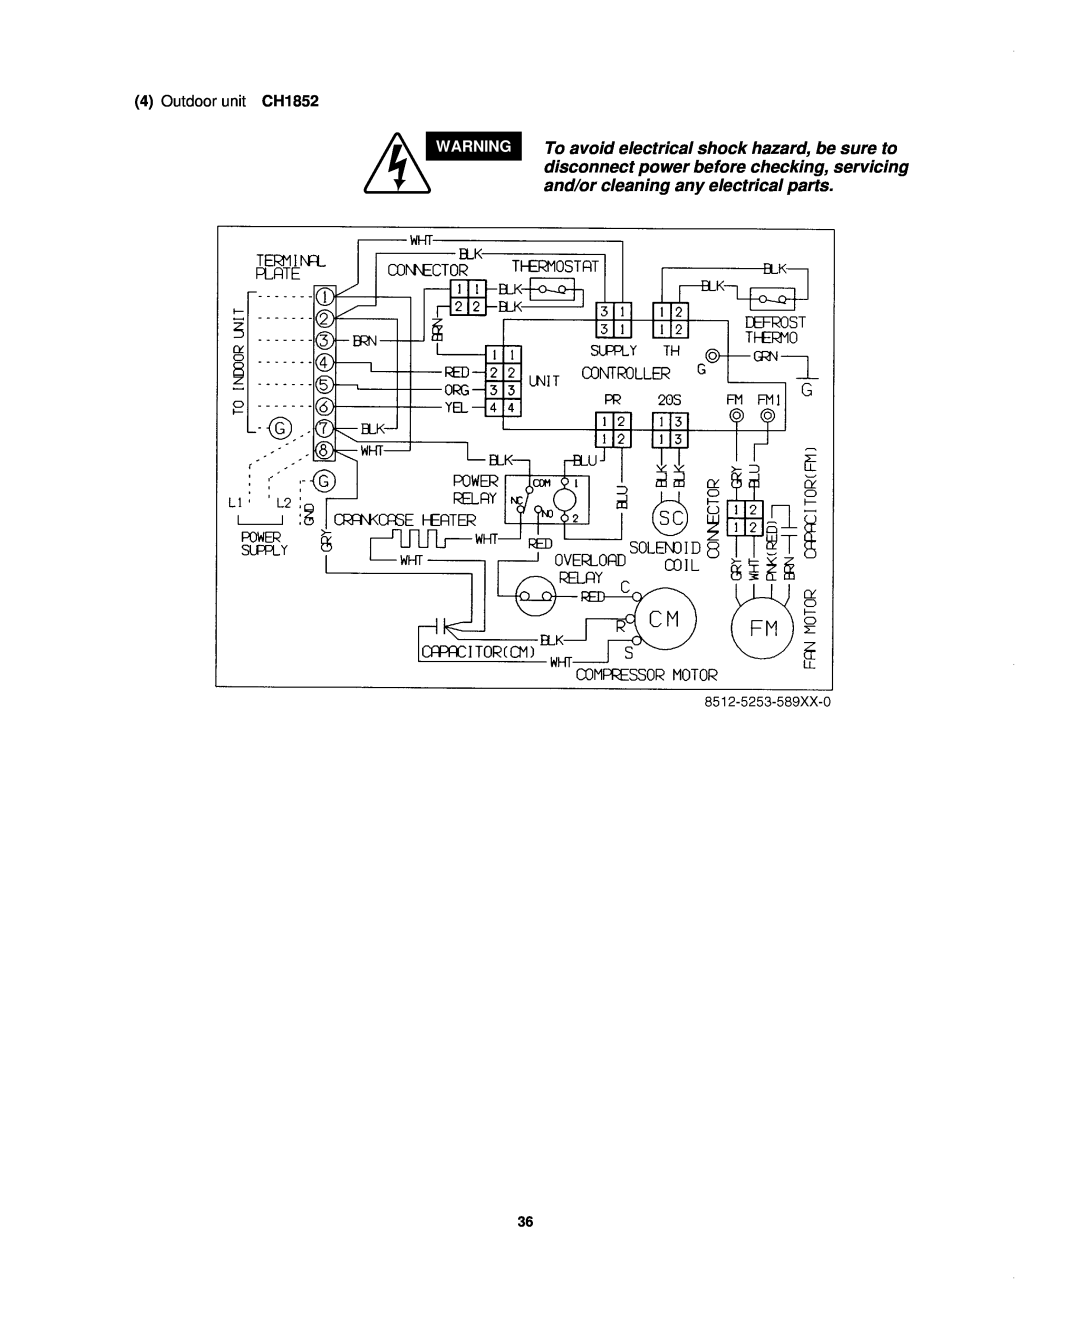 Sanyo CH0952, CH1852, KHS1852-S To avoid electrical shock hazard, be sure to, disconnect power before checking, servicing 